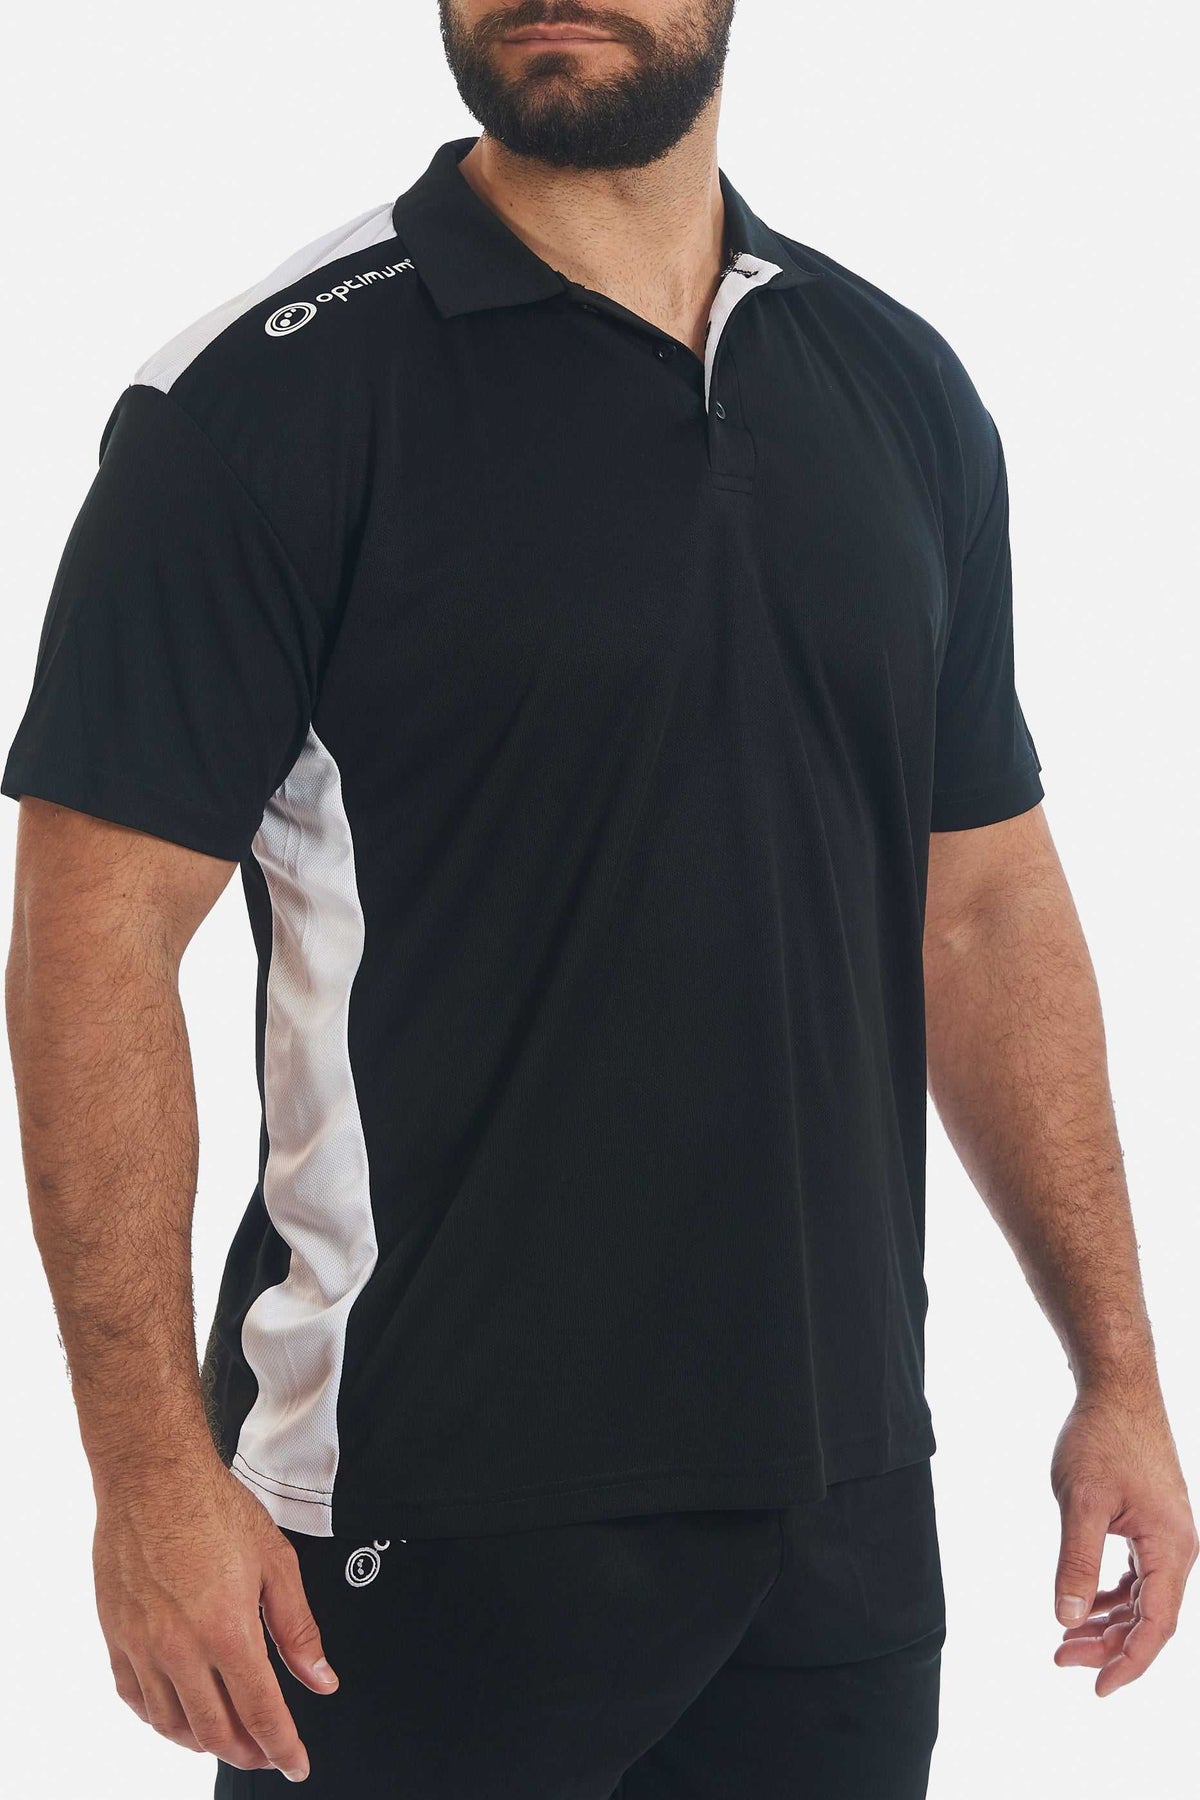 Tempo Polo T-Shirt White Discount Products